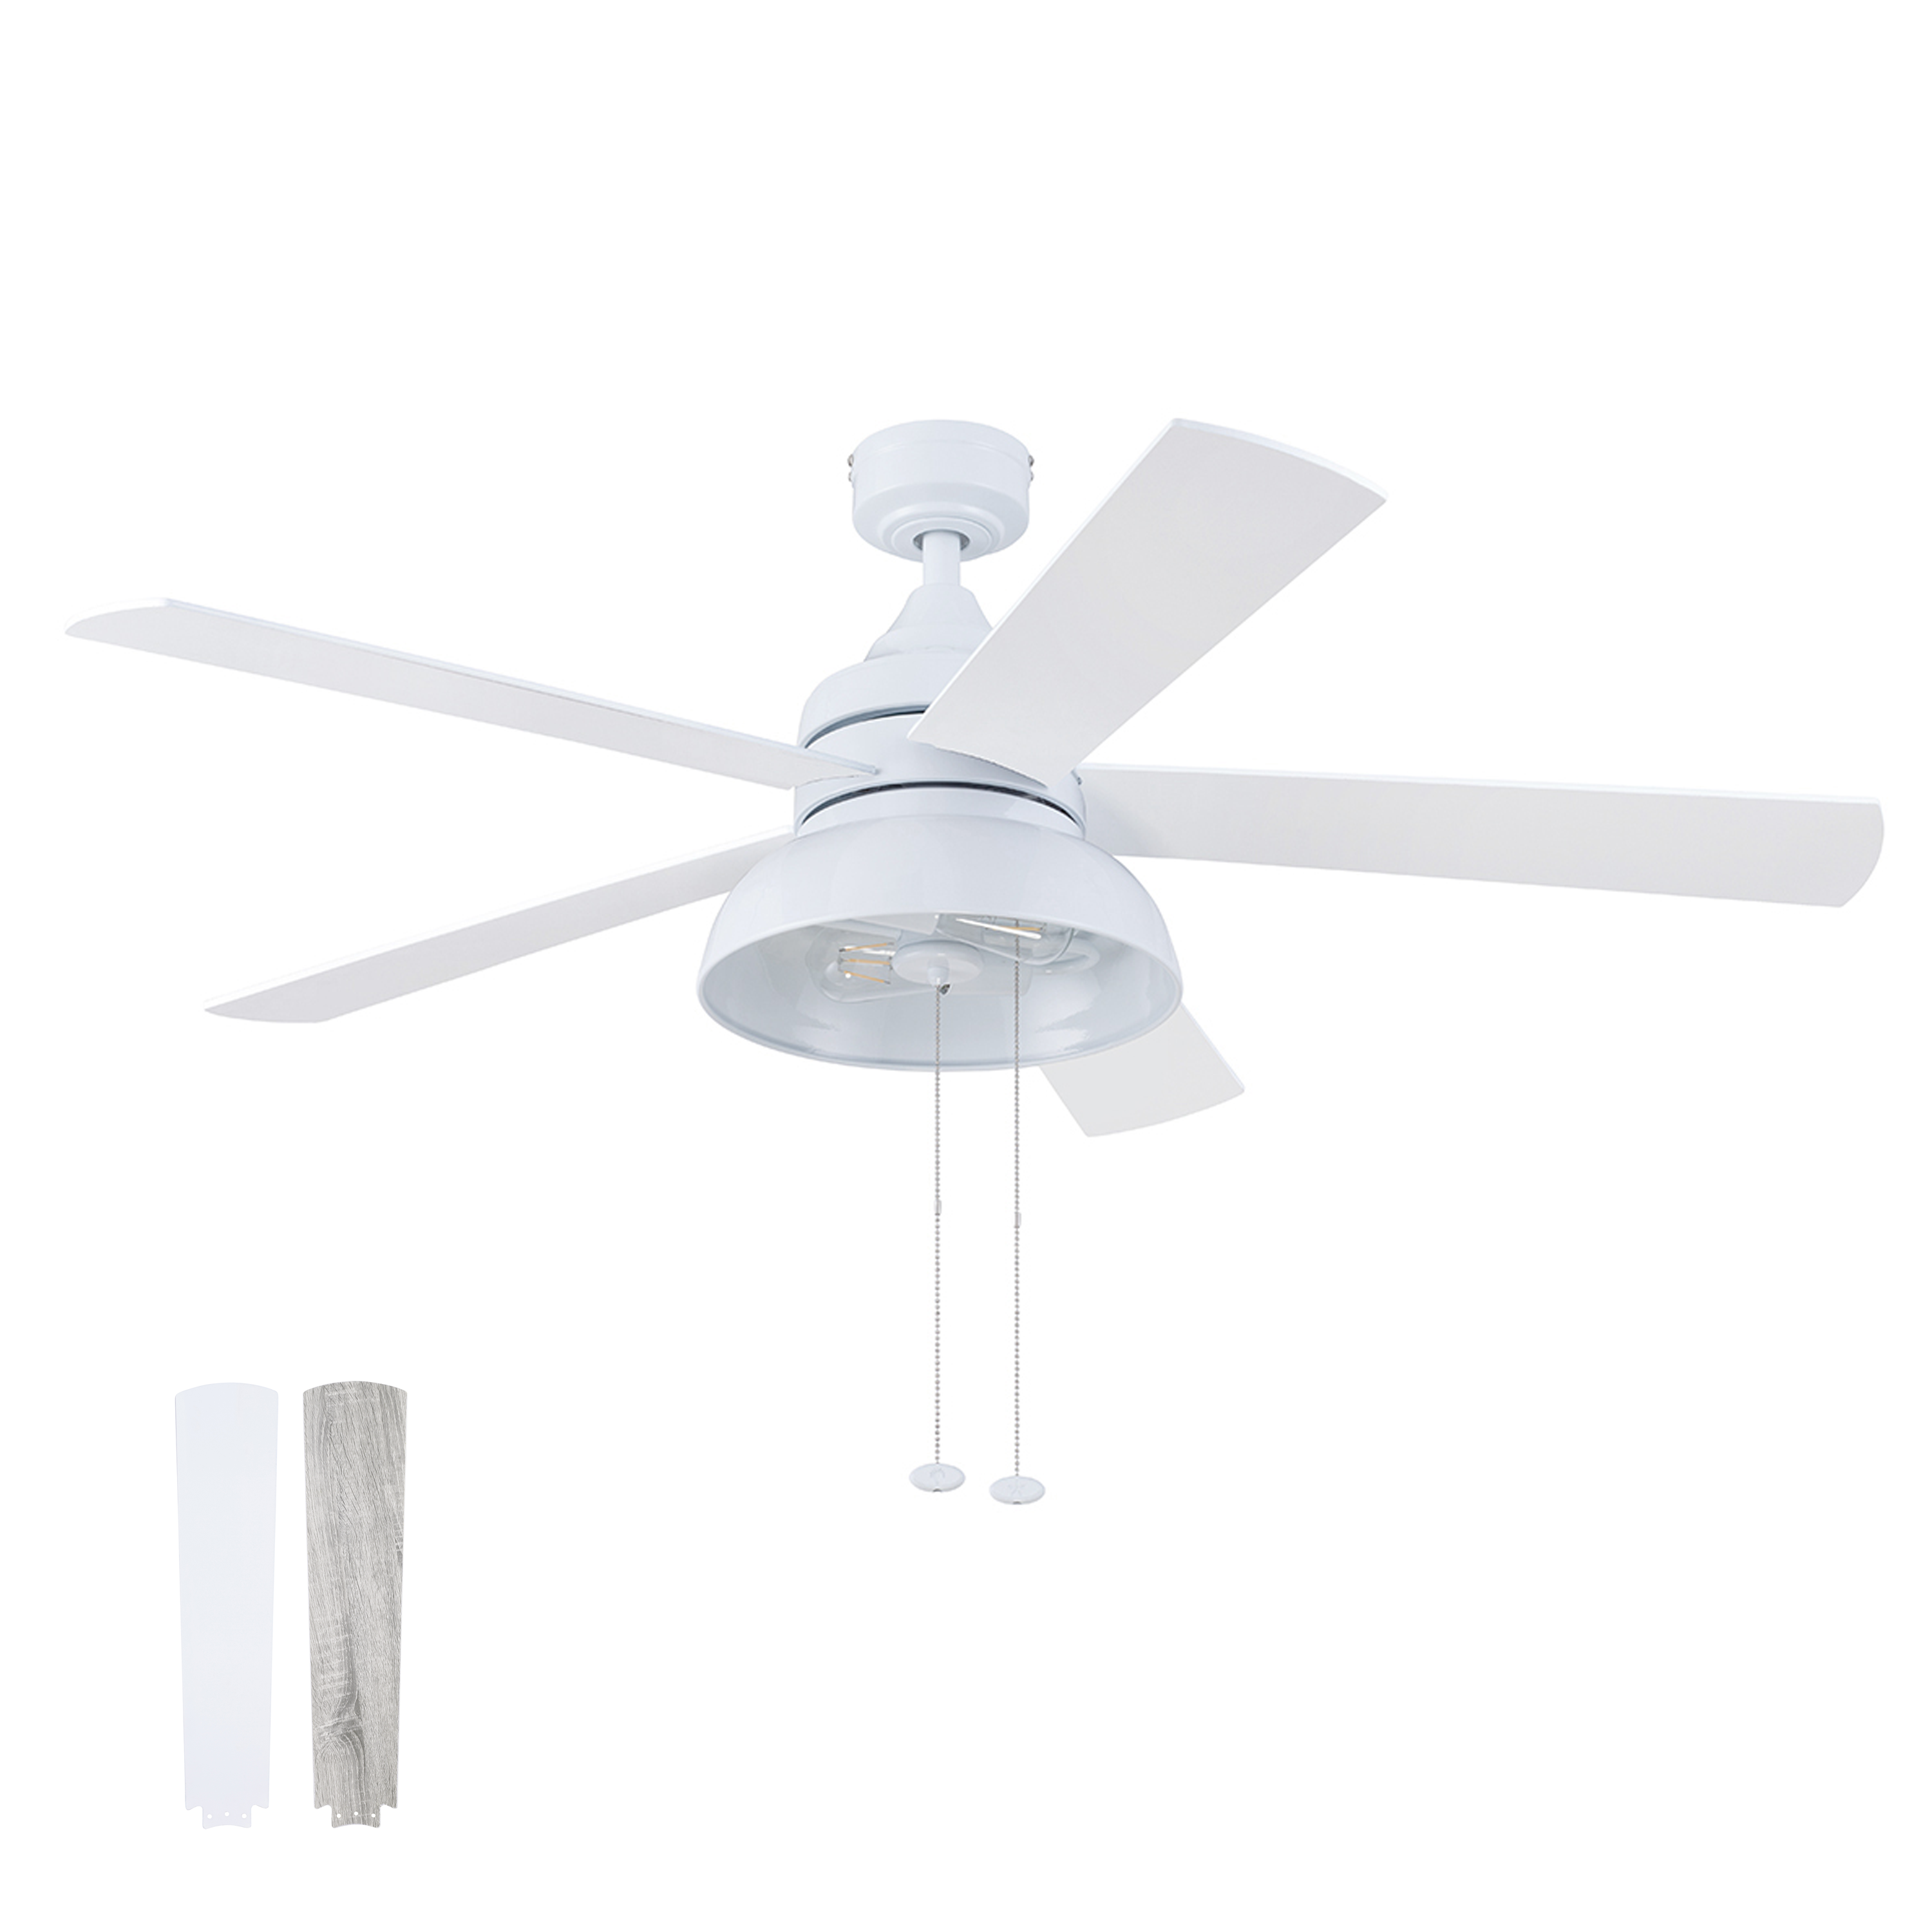 Prominence Home Brightondale 52-in Matte Black LED Indoor/Outdoor Ceiling Fan with Light (5-Blade)